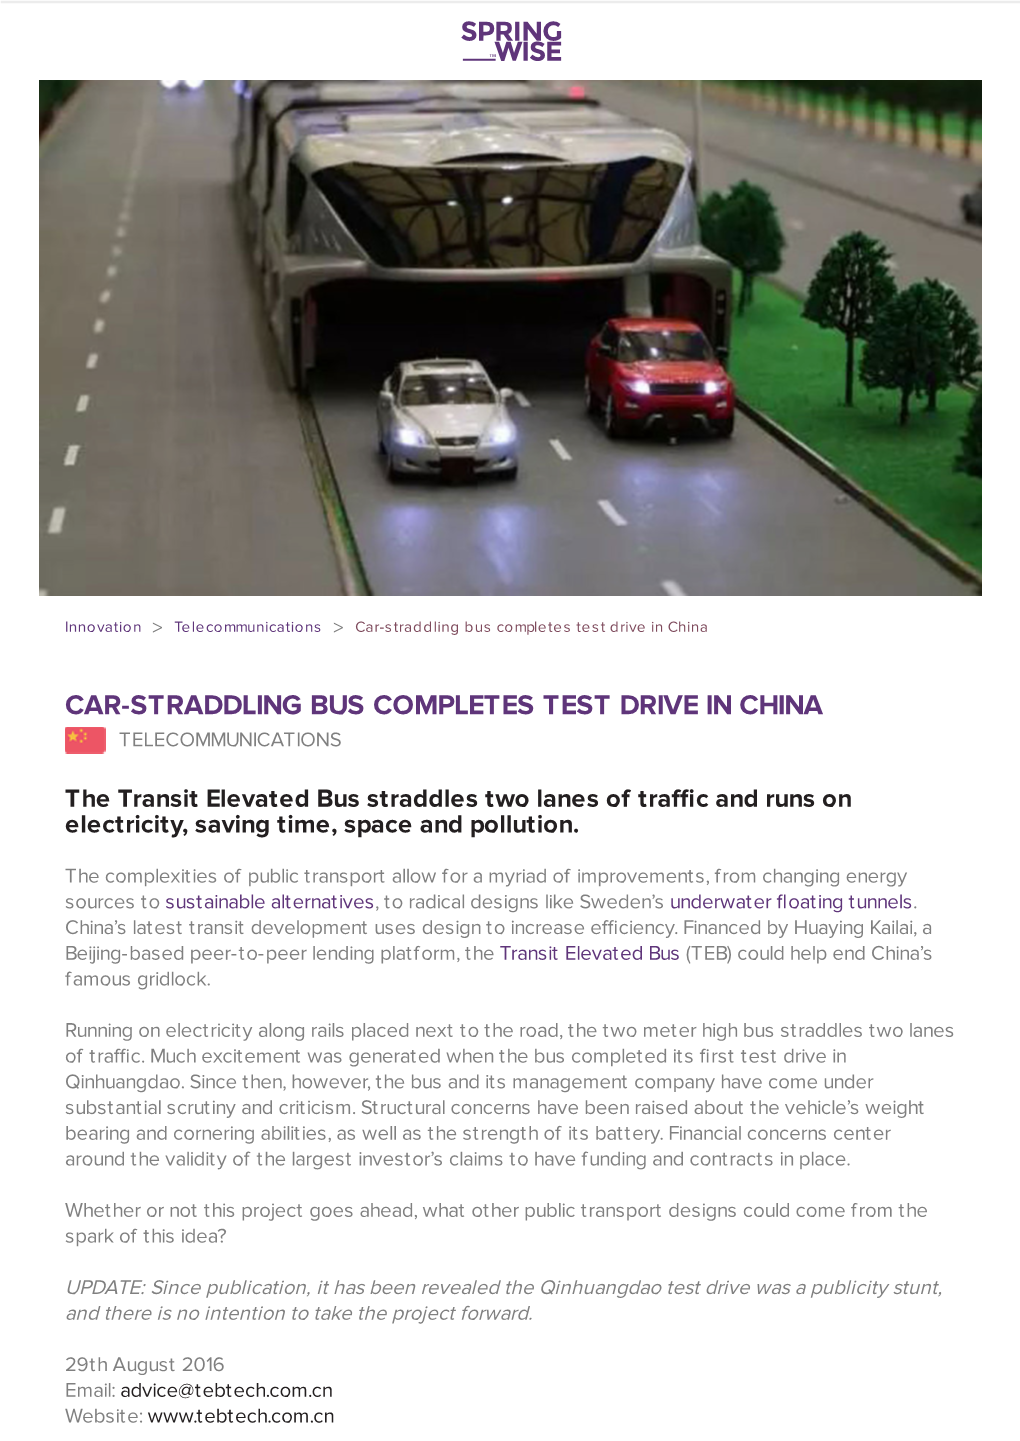 Car-Straddling Bus Completes Test Drive in China